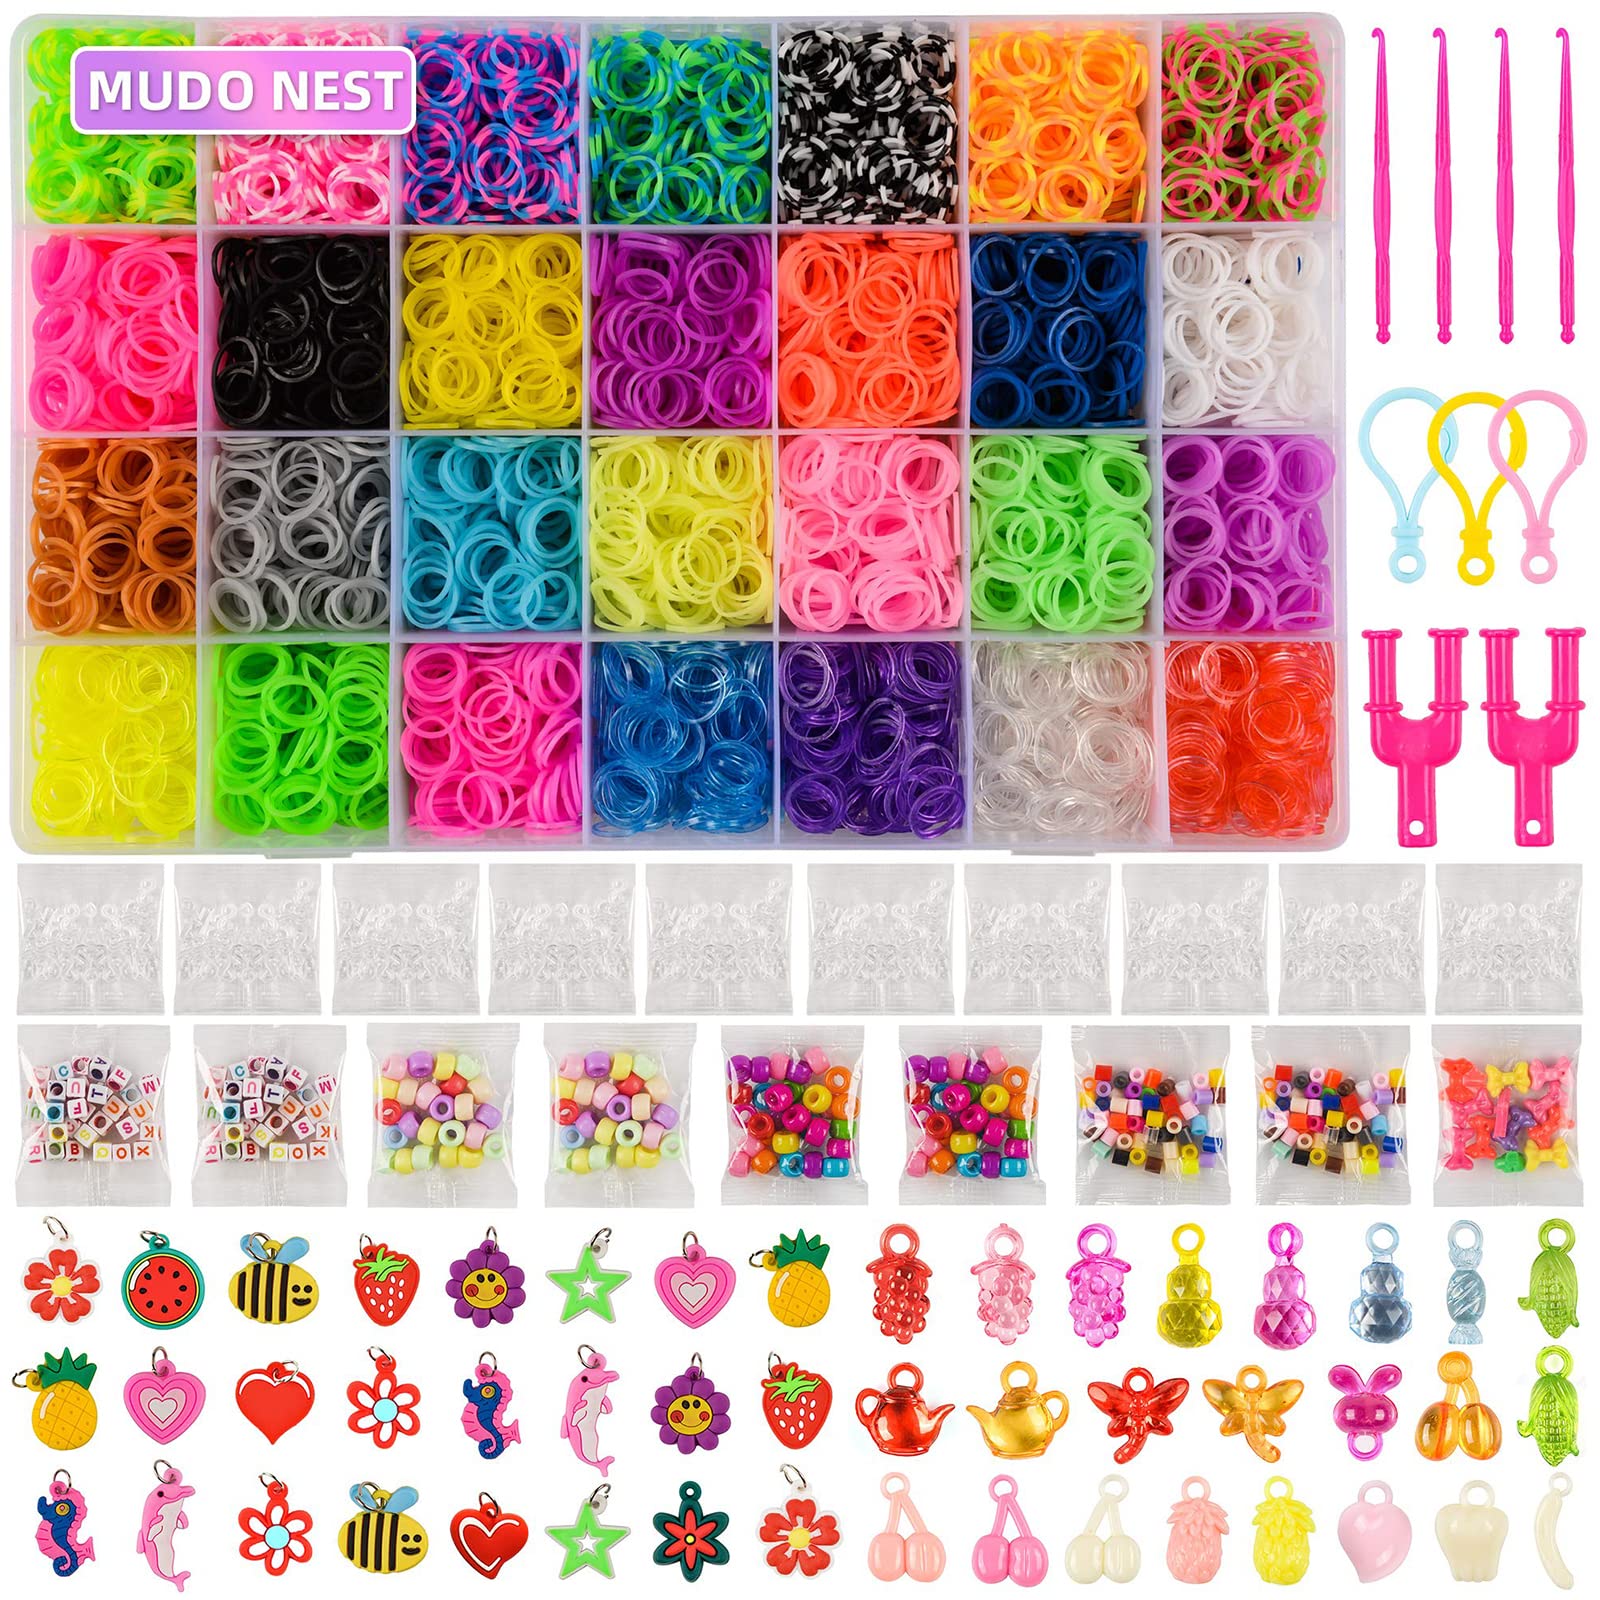 PATPAT® 2500pcs+ Loom Bands Kit for Kids Girls Rainbow Looms Rubber Band  Craft Friendship Bracelet Making Loom Band Set with Braiding Tools, Letter  Beads, Cute Pendants Birthday Gift : Amazon.in: Toys &